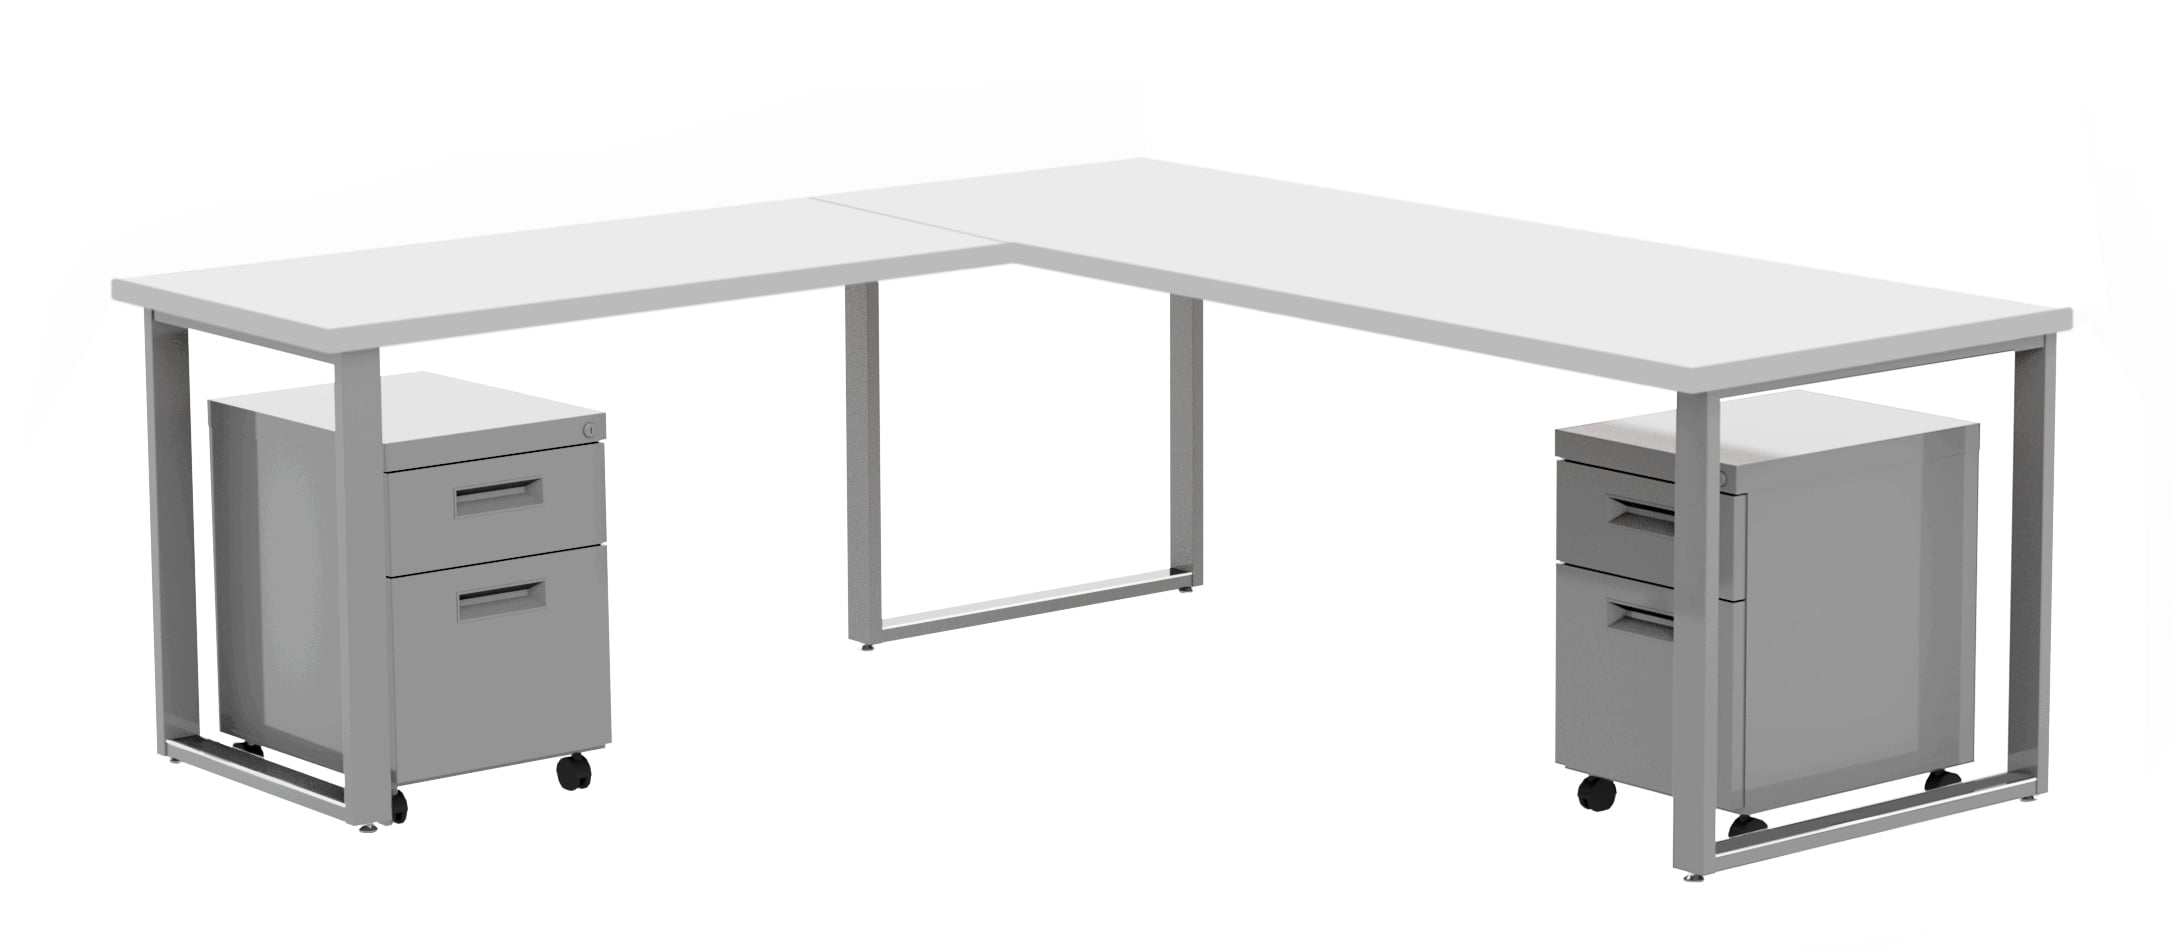 72 X 30 Desk With 48 X 24 Return And 2 Mobile Pedestals